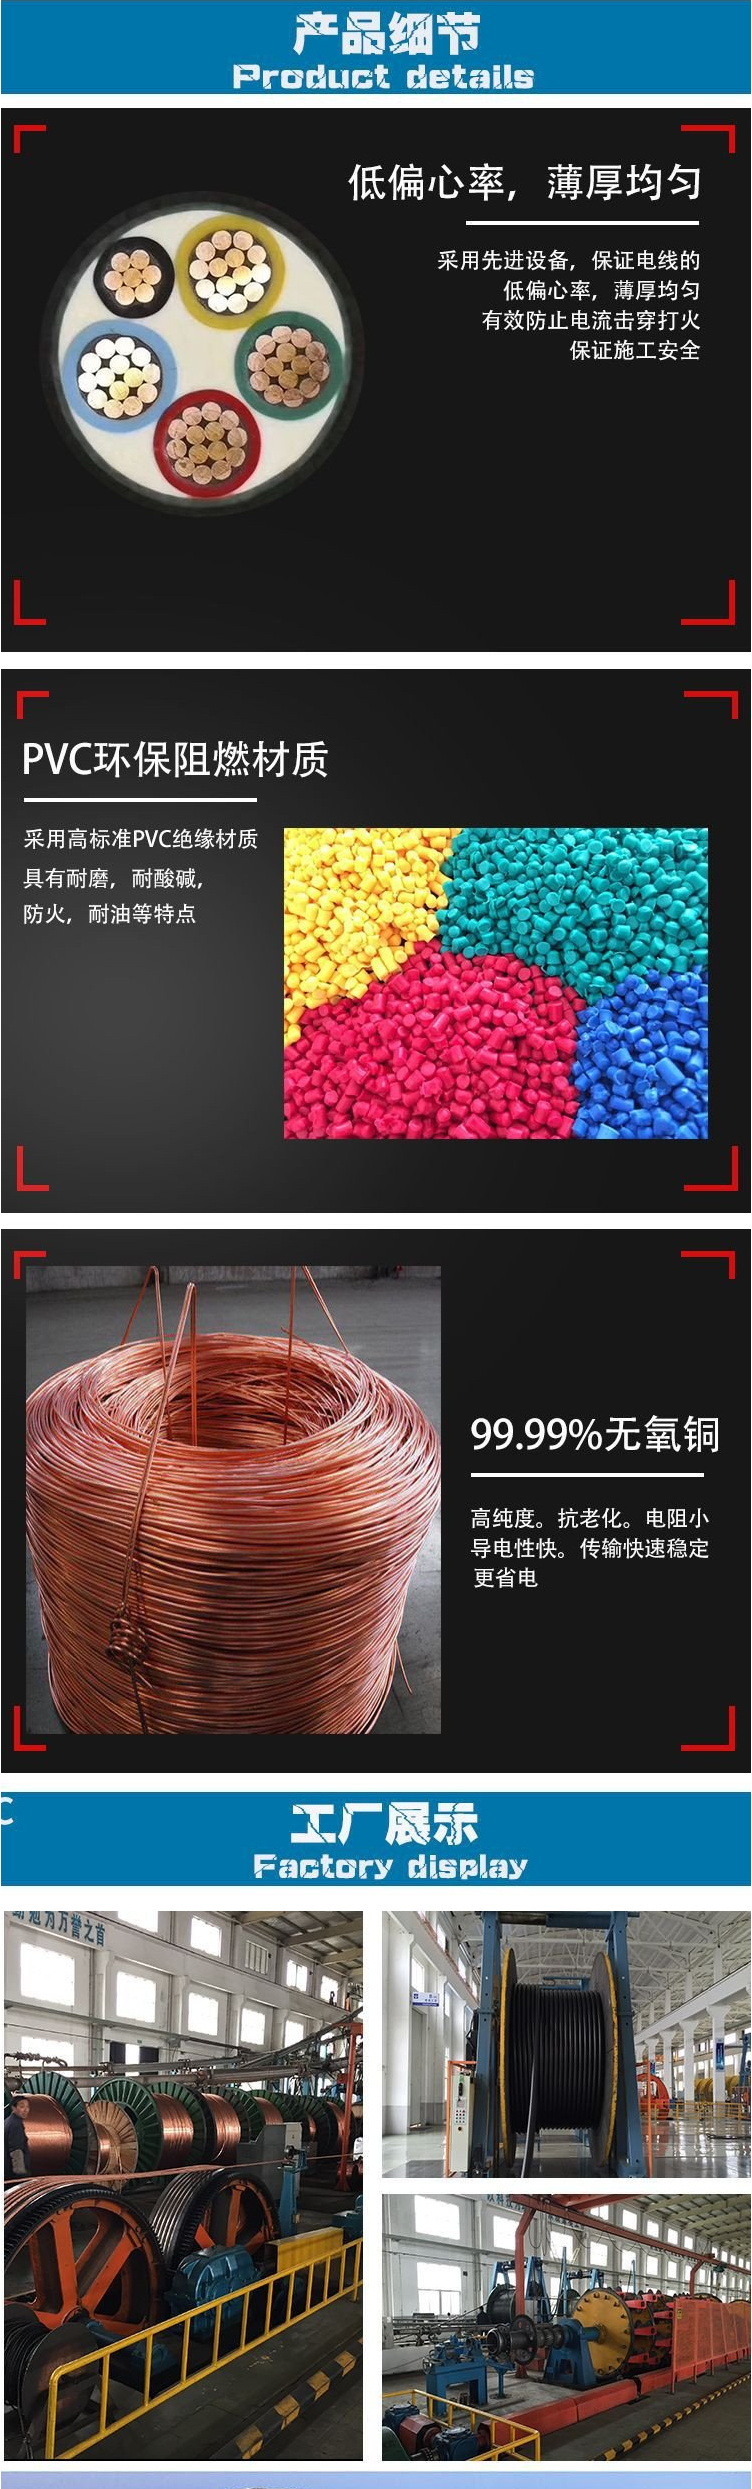 Huiyuan Chaoyang Brand Electric Wire RVS Fire Wire - Twisted Pair -2 * 1.5RVSP Insulated Cable